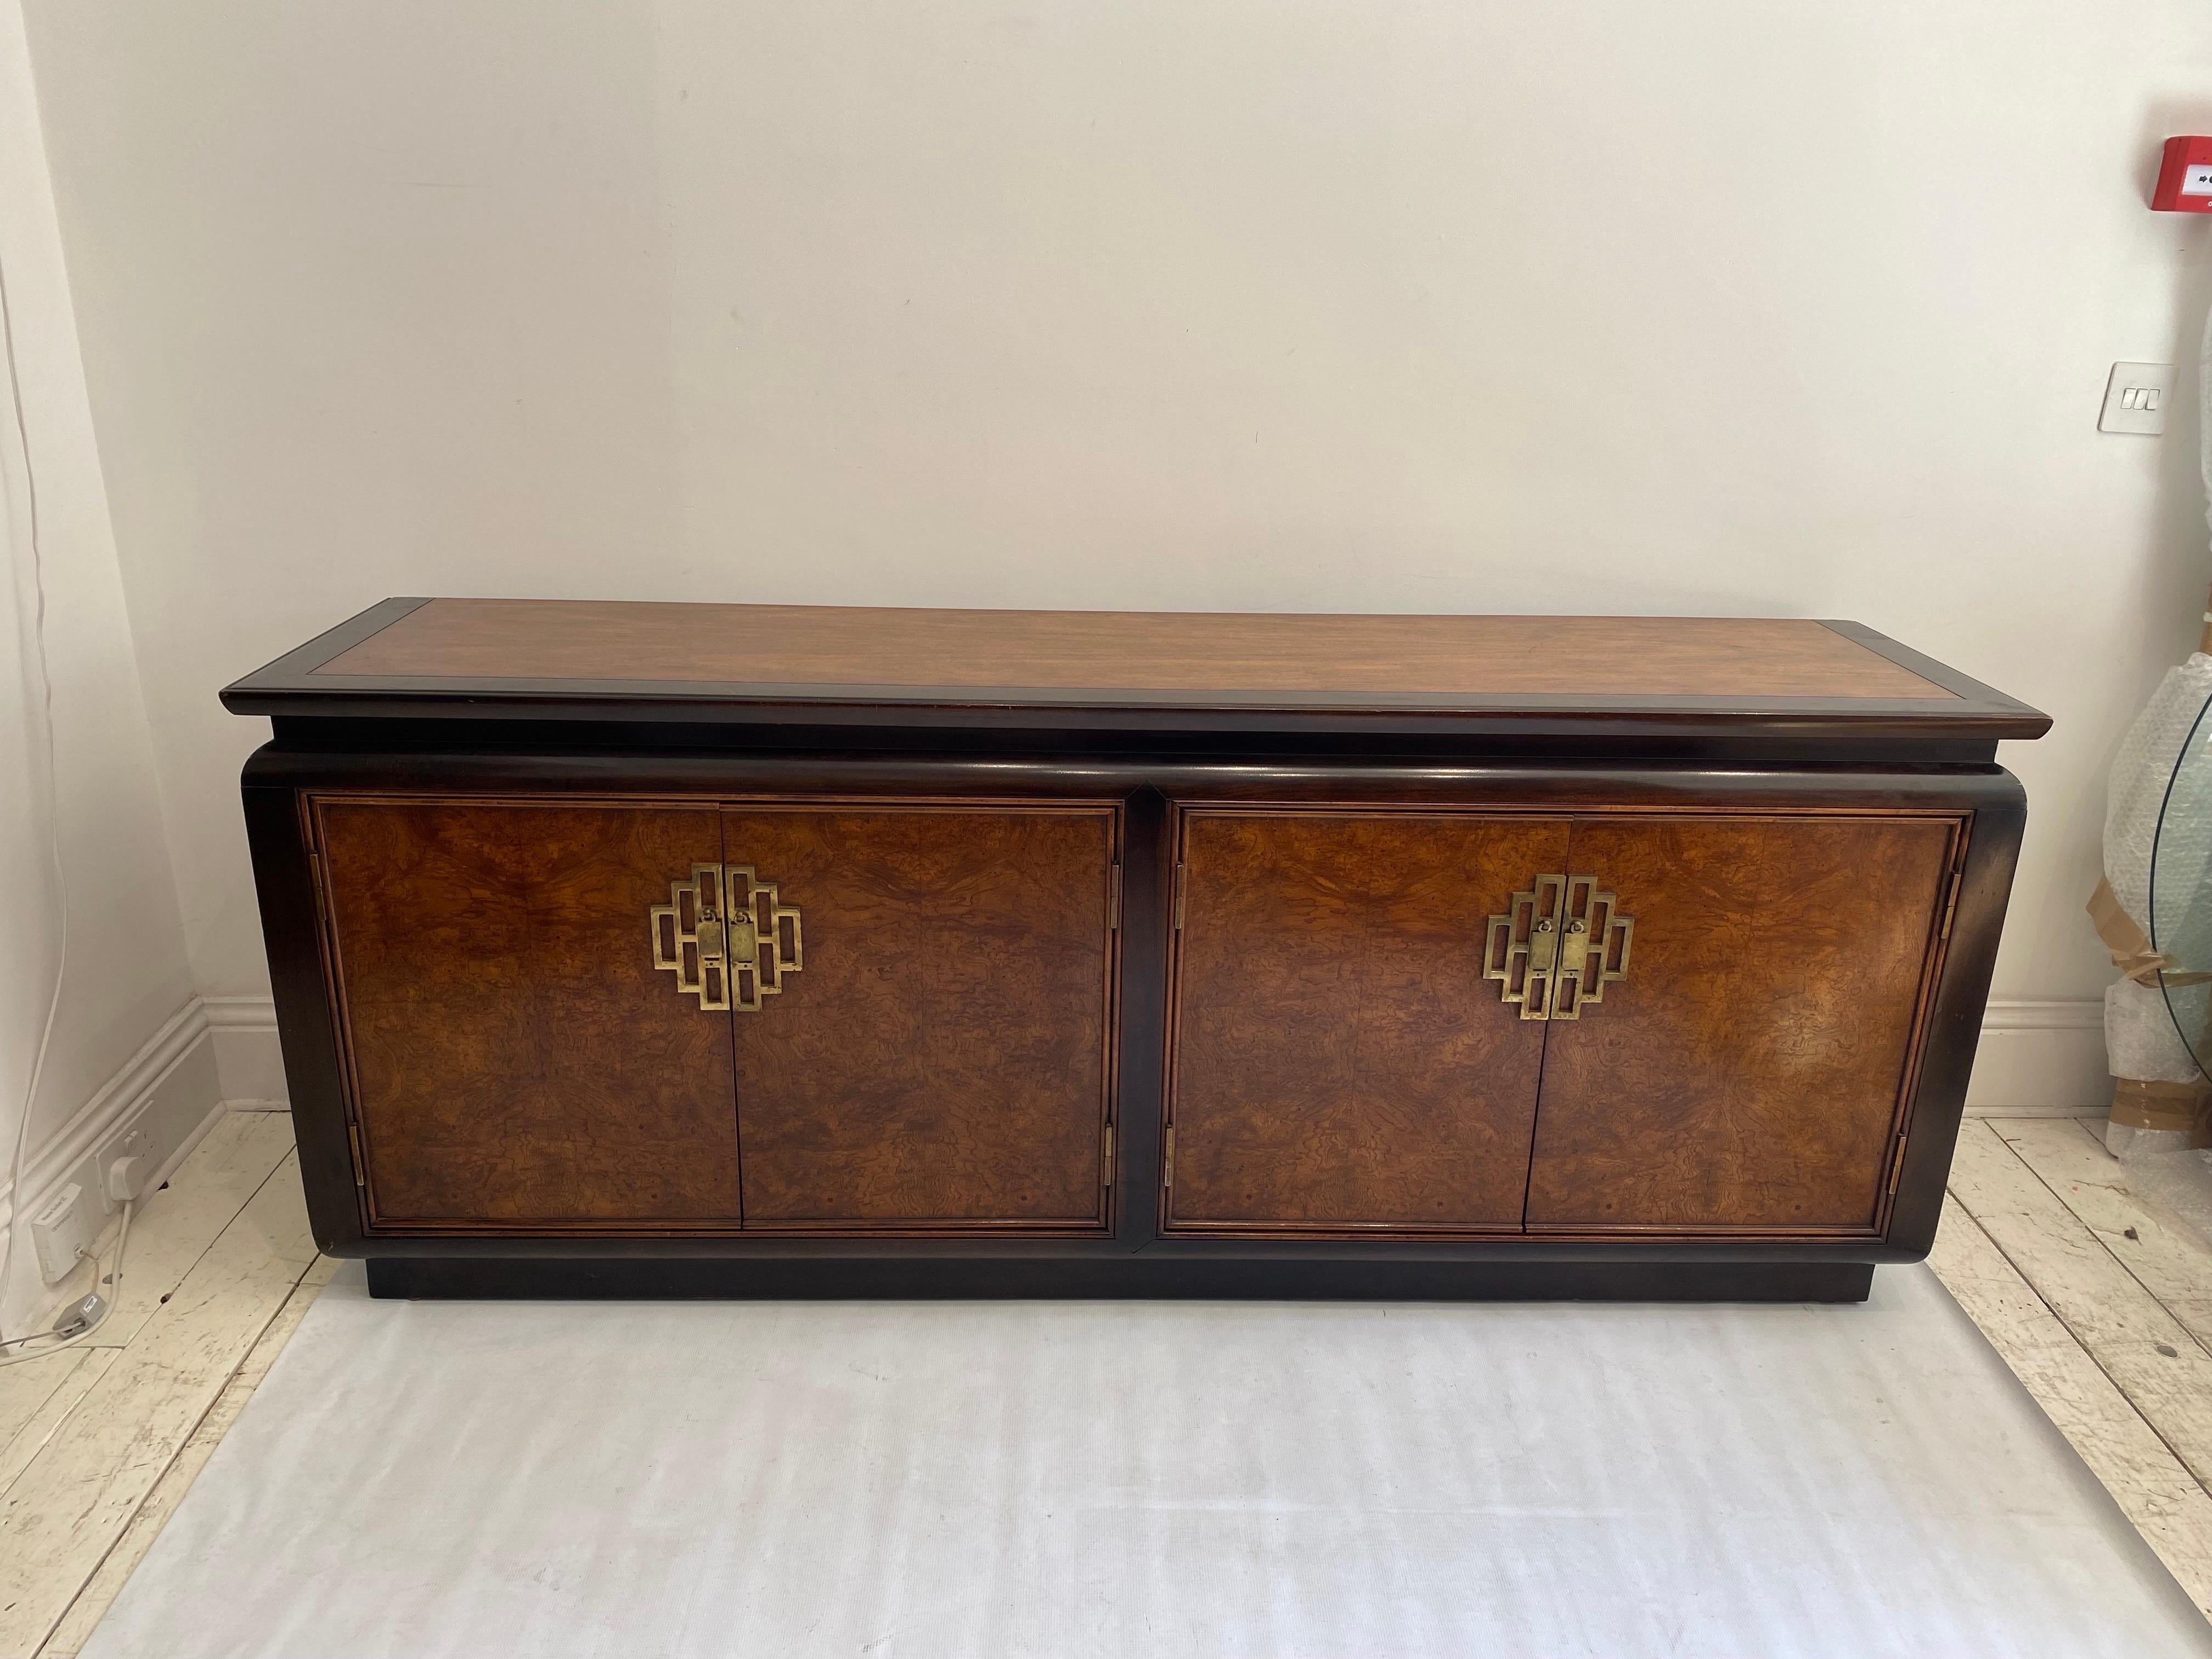 This sideboard, in burl and brass finish details by Raymond Sabota for Century Furniture Of Distinction from his Chin Hua Collection is a rare UK import. Although Century Furniture were popular in USA, in Europe and UK they are rarely seen.

The